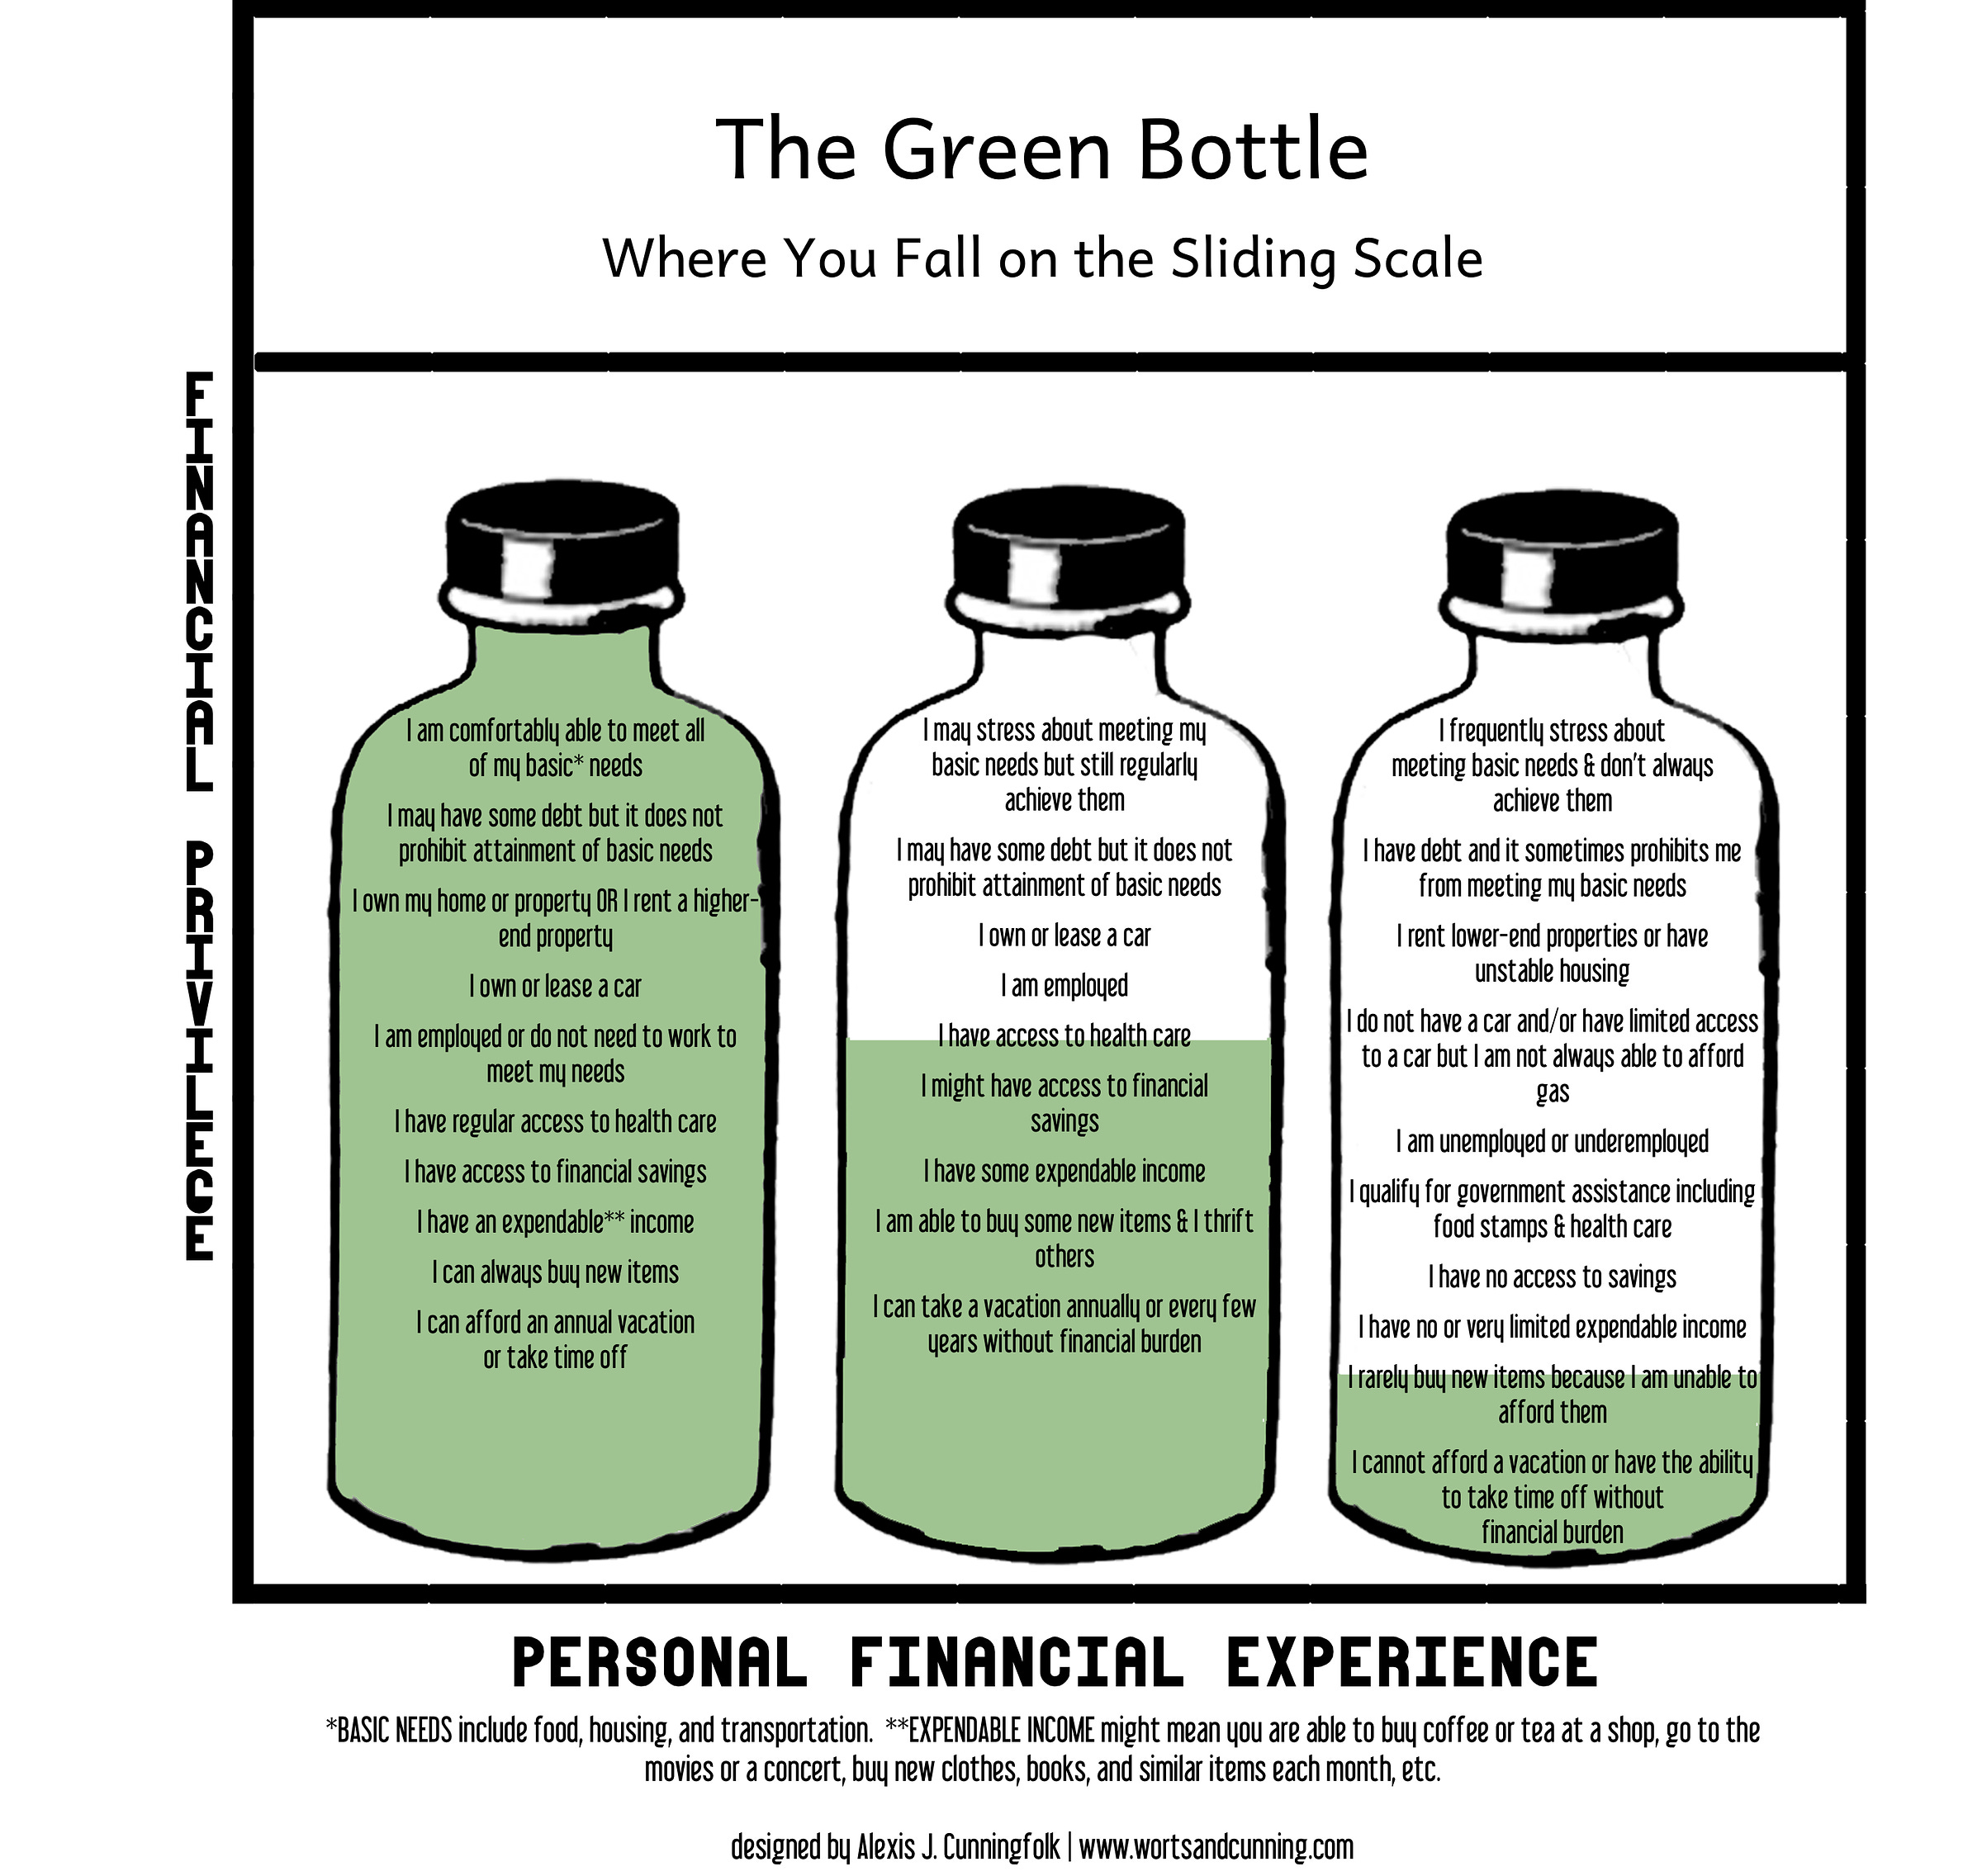 Image description: Title text: The Green Bottle: Where You Fall on the Sliding Scale  [Three bottles are pictured in a box, each with a different amount of green filled in. Down the left side of the box it says “Financial Privilege.” Along the bottom of the box it says “Personal Financial Experience.”   The left bottle is fully green, and the text inside reads:] I am comfortably able to meet all of my basic* needs I may have some debt but it does not prohibit attainment of basic needs I own my home or property OR I rent a higher-end property I own or lease a car I am employed or do not need to work to meet my needs I have regular access to health care I have access to financial savings I have an expendable** income I can always buy new items I can afford an annual vacation or take time off  [The middle bottle is half-full of green, and the text inside reads:] I may stress about meeting my basic needs but still regularly achieve them I may have some debt but it does not prohibit attainment of basic needs I own or lease a car I am employed I have access to health care I might have access to financial savings I have some expandable income I am able to buy some new items and I thrift others I can take a vacation annually or every few years without financial burden  [The right bottle is only about a quarter filled with green, and the text inside reads:] I frequently stress about meeting basic needs and don’t always achieve them I have debt and it sometimes prohibits me from meeting my basic needs I rent lower-end properties or have unstable housing I do not have a car and/or have limited access to a car but I am not always able to afford gas I am unemployed or underemployed I qualify for government assistance including food stamps and health care I have no access to savings I have no or very limited expendable income I rarely buy new items because I am unable to afford them I cannot afford a vacation or have the ability to take time off without financial burden  [At the bottom of the graphic are two footnotes:] “*Basic needs include food, housing, and transportation. **Expendable income might mean you are able to buy coffee or tea at a shop, go to the movies or a concert, buy new clothes, books, and similar items each month, etc.”  [Credit: “designed by Alexis J. Cunningfolk, www.wortsandcunning.com”]